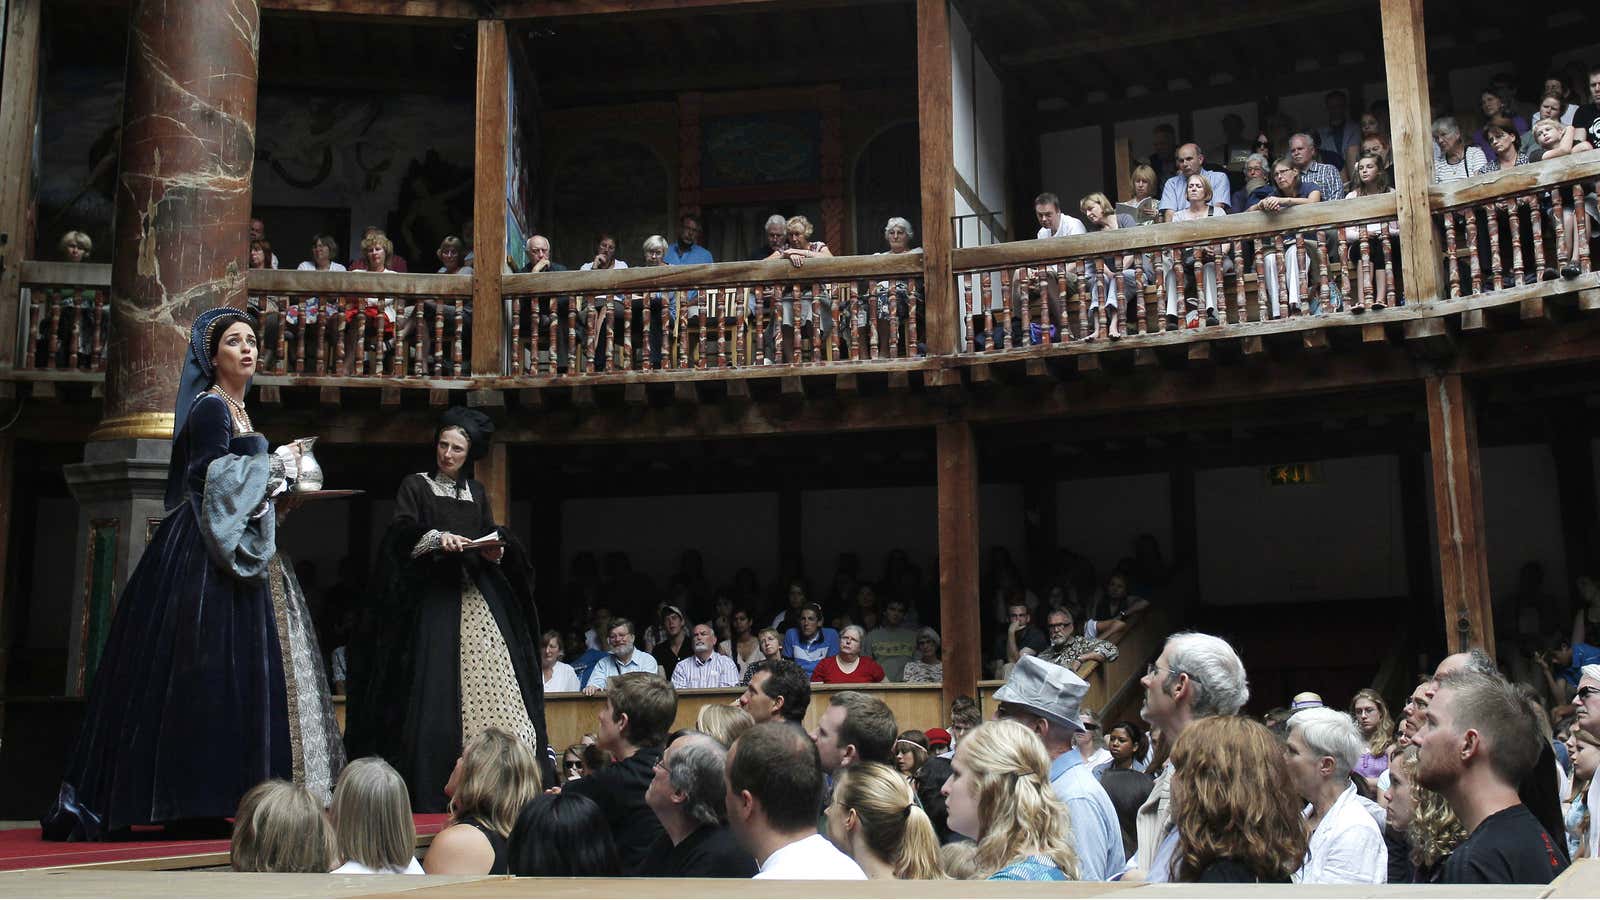 The audience watches Miranda Raison (L) perform as Anne Boleyn in Shakepeare’s Henry VIII at the Globe Theatre in London July 6, 2010. William Shakespeare’s…